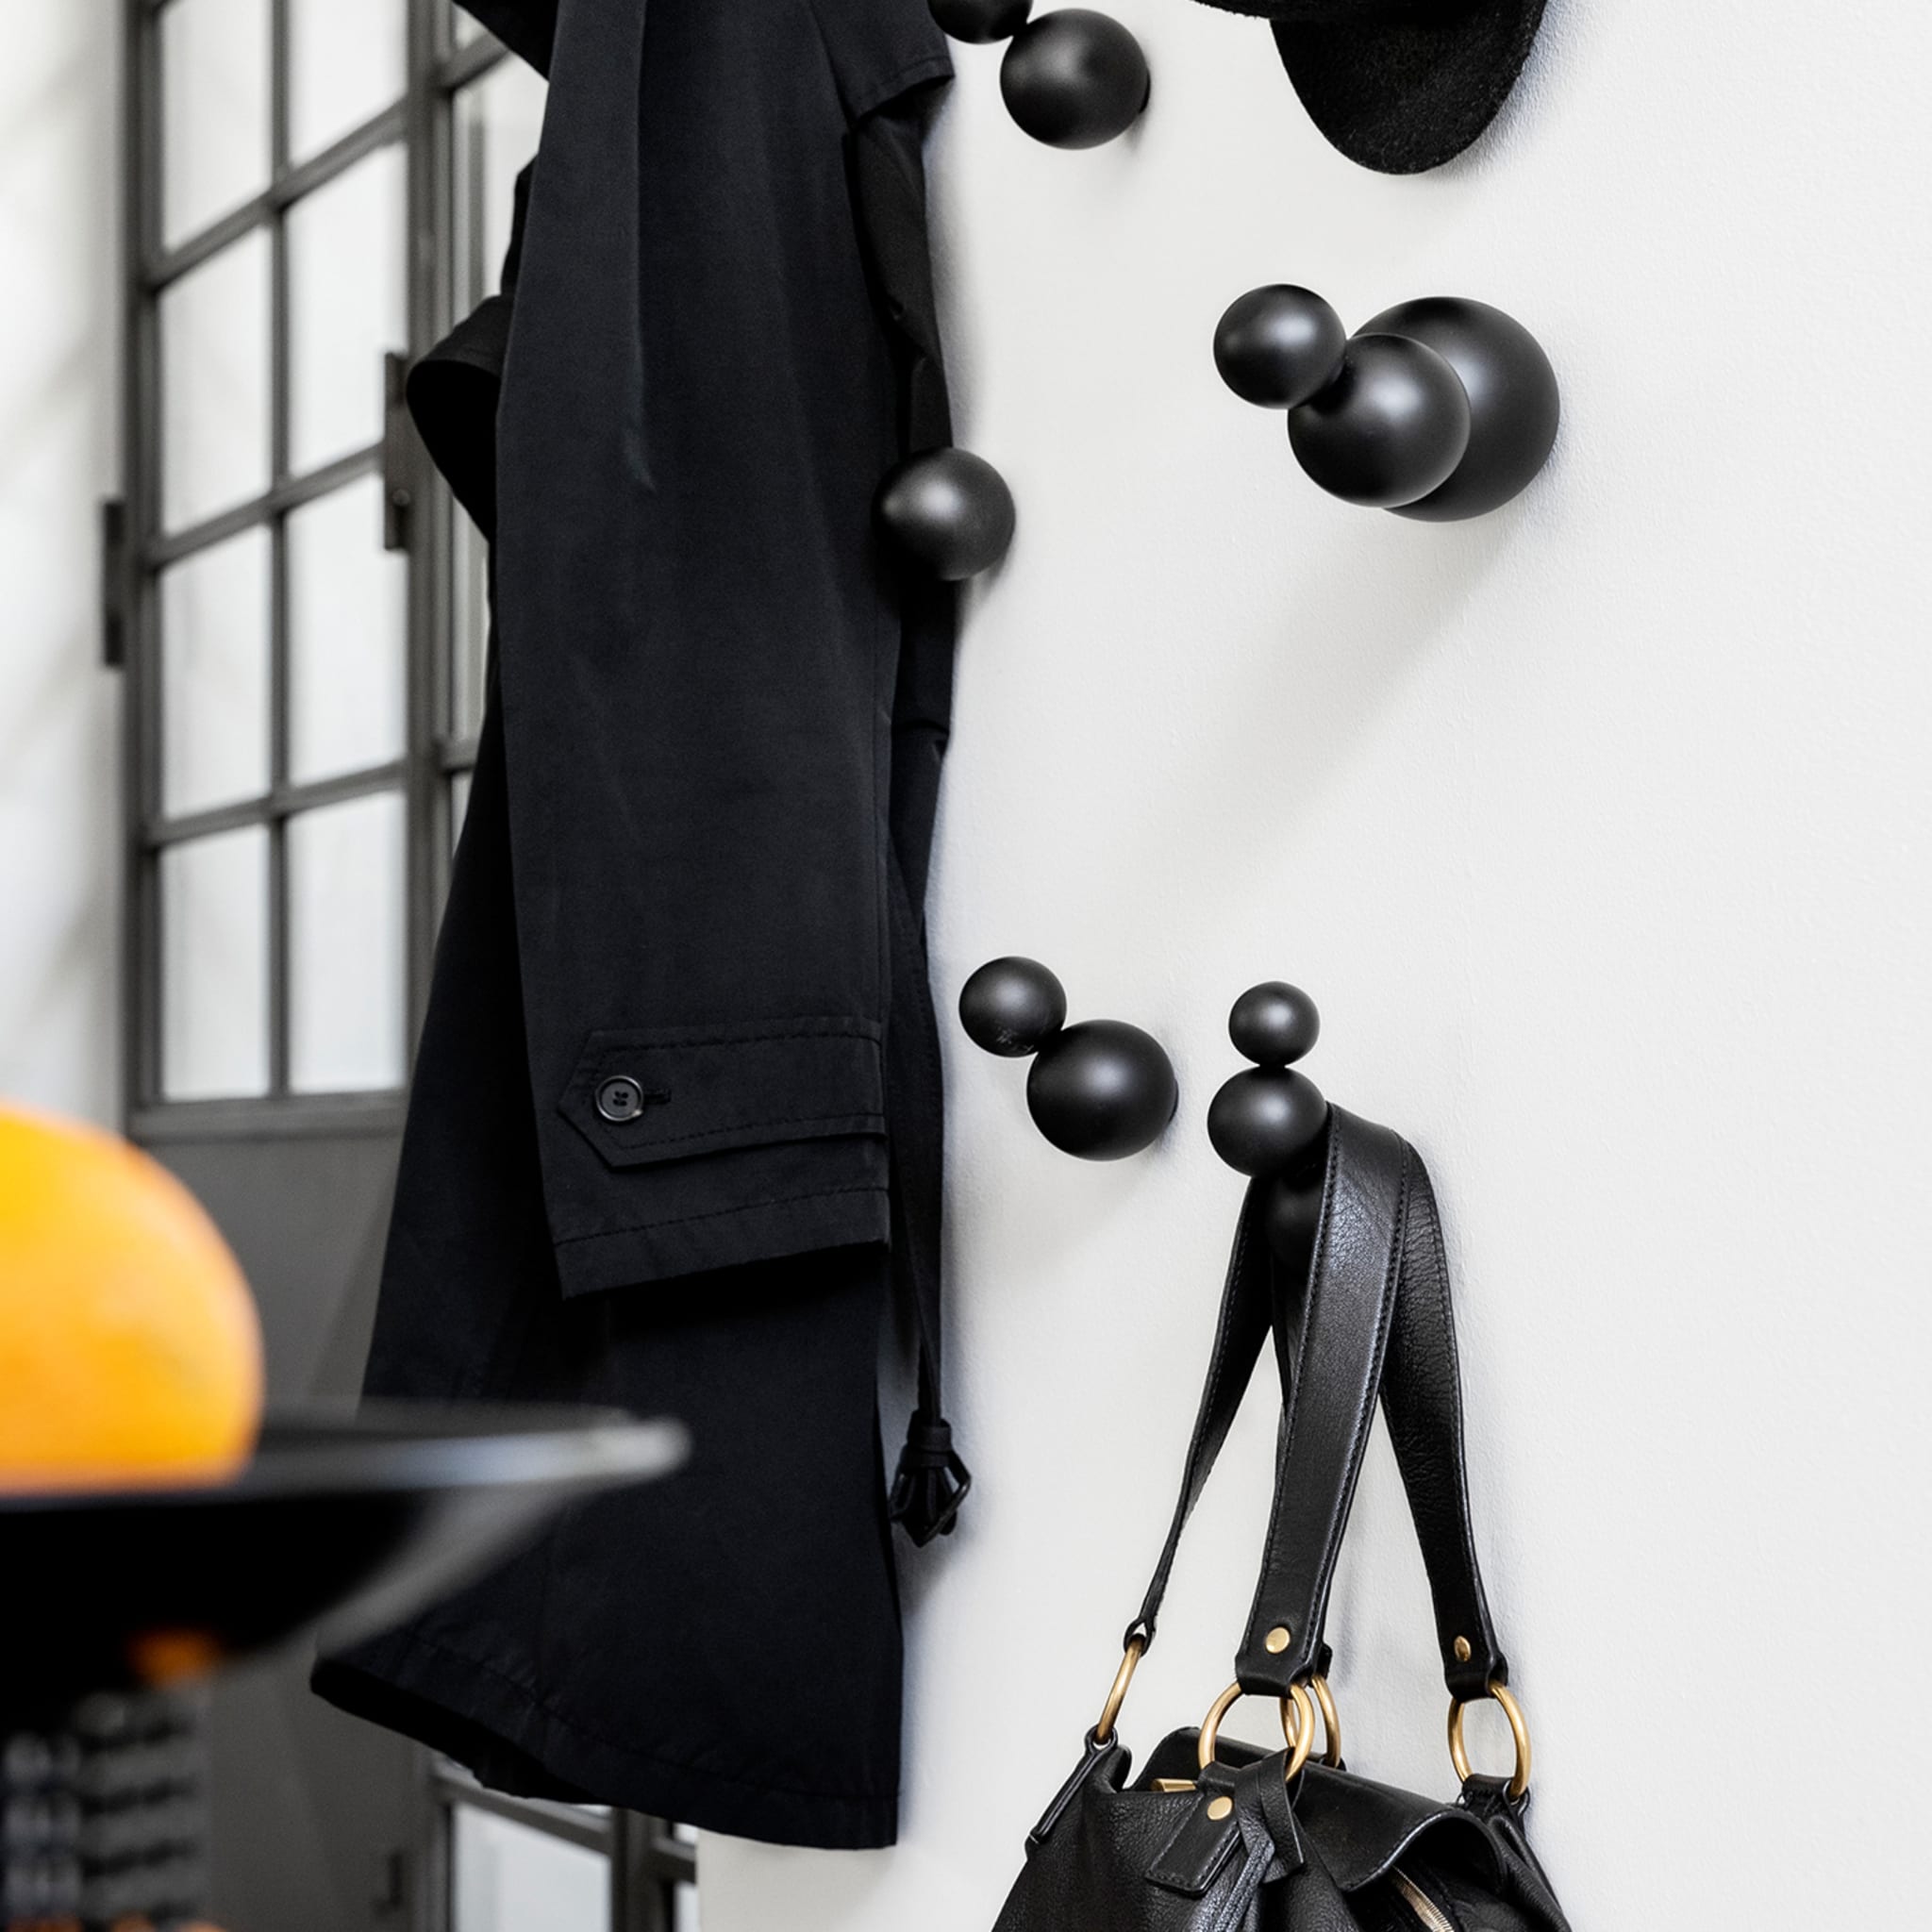 Bubble Set of 5 Black Wall Coat Hangers by Annebet Philps - Alternative view 1